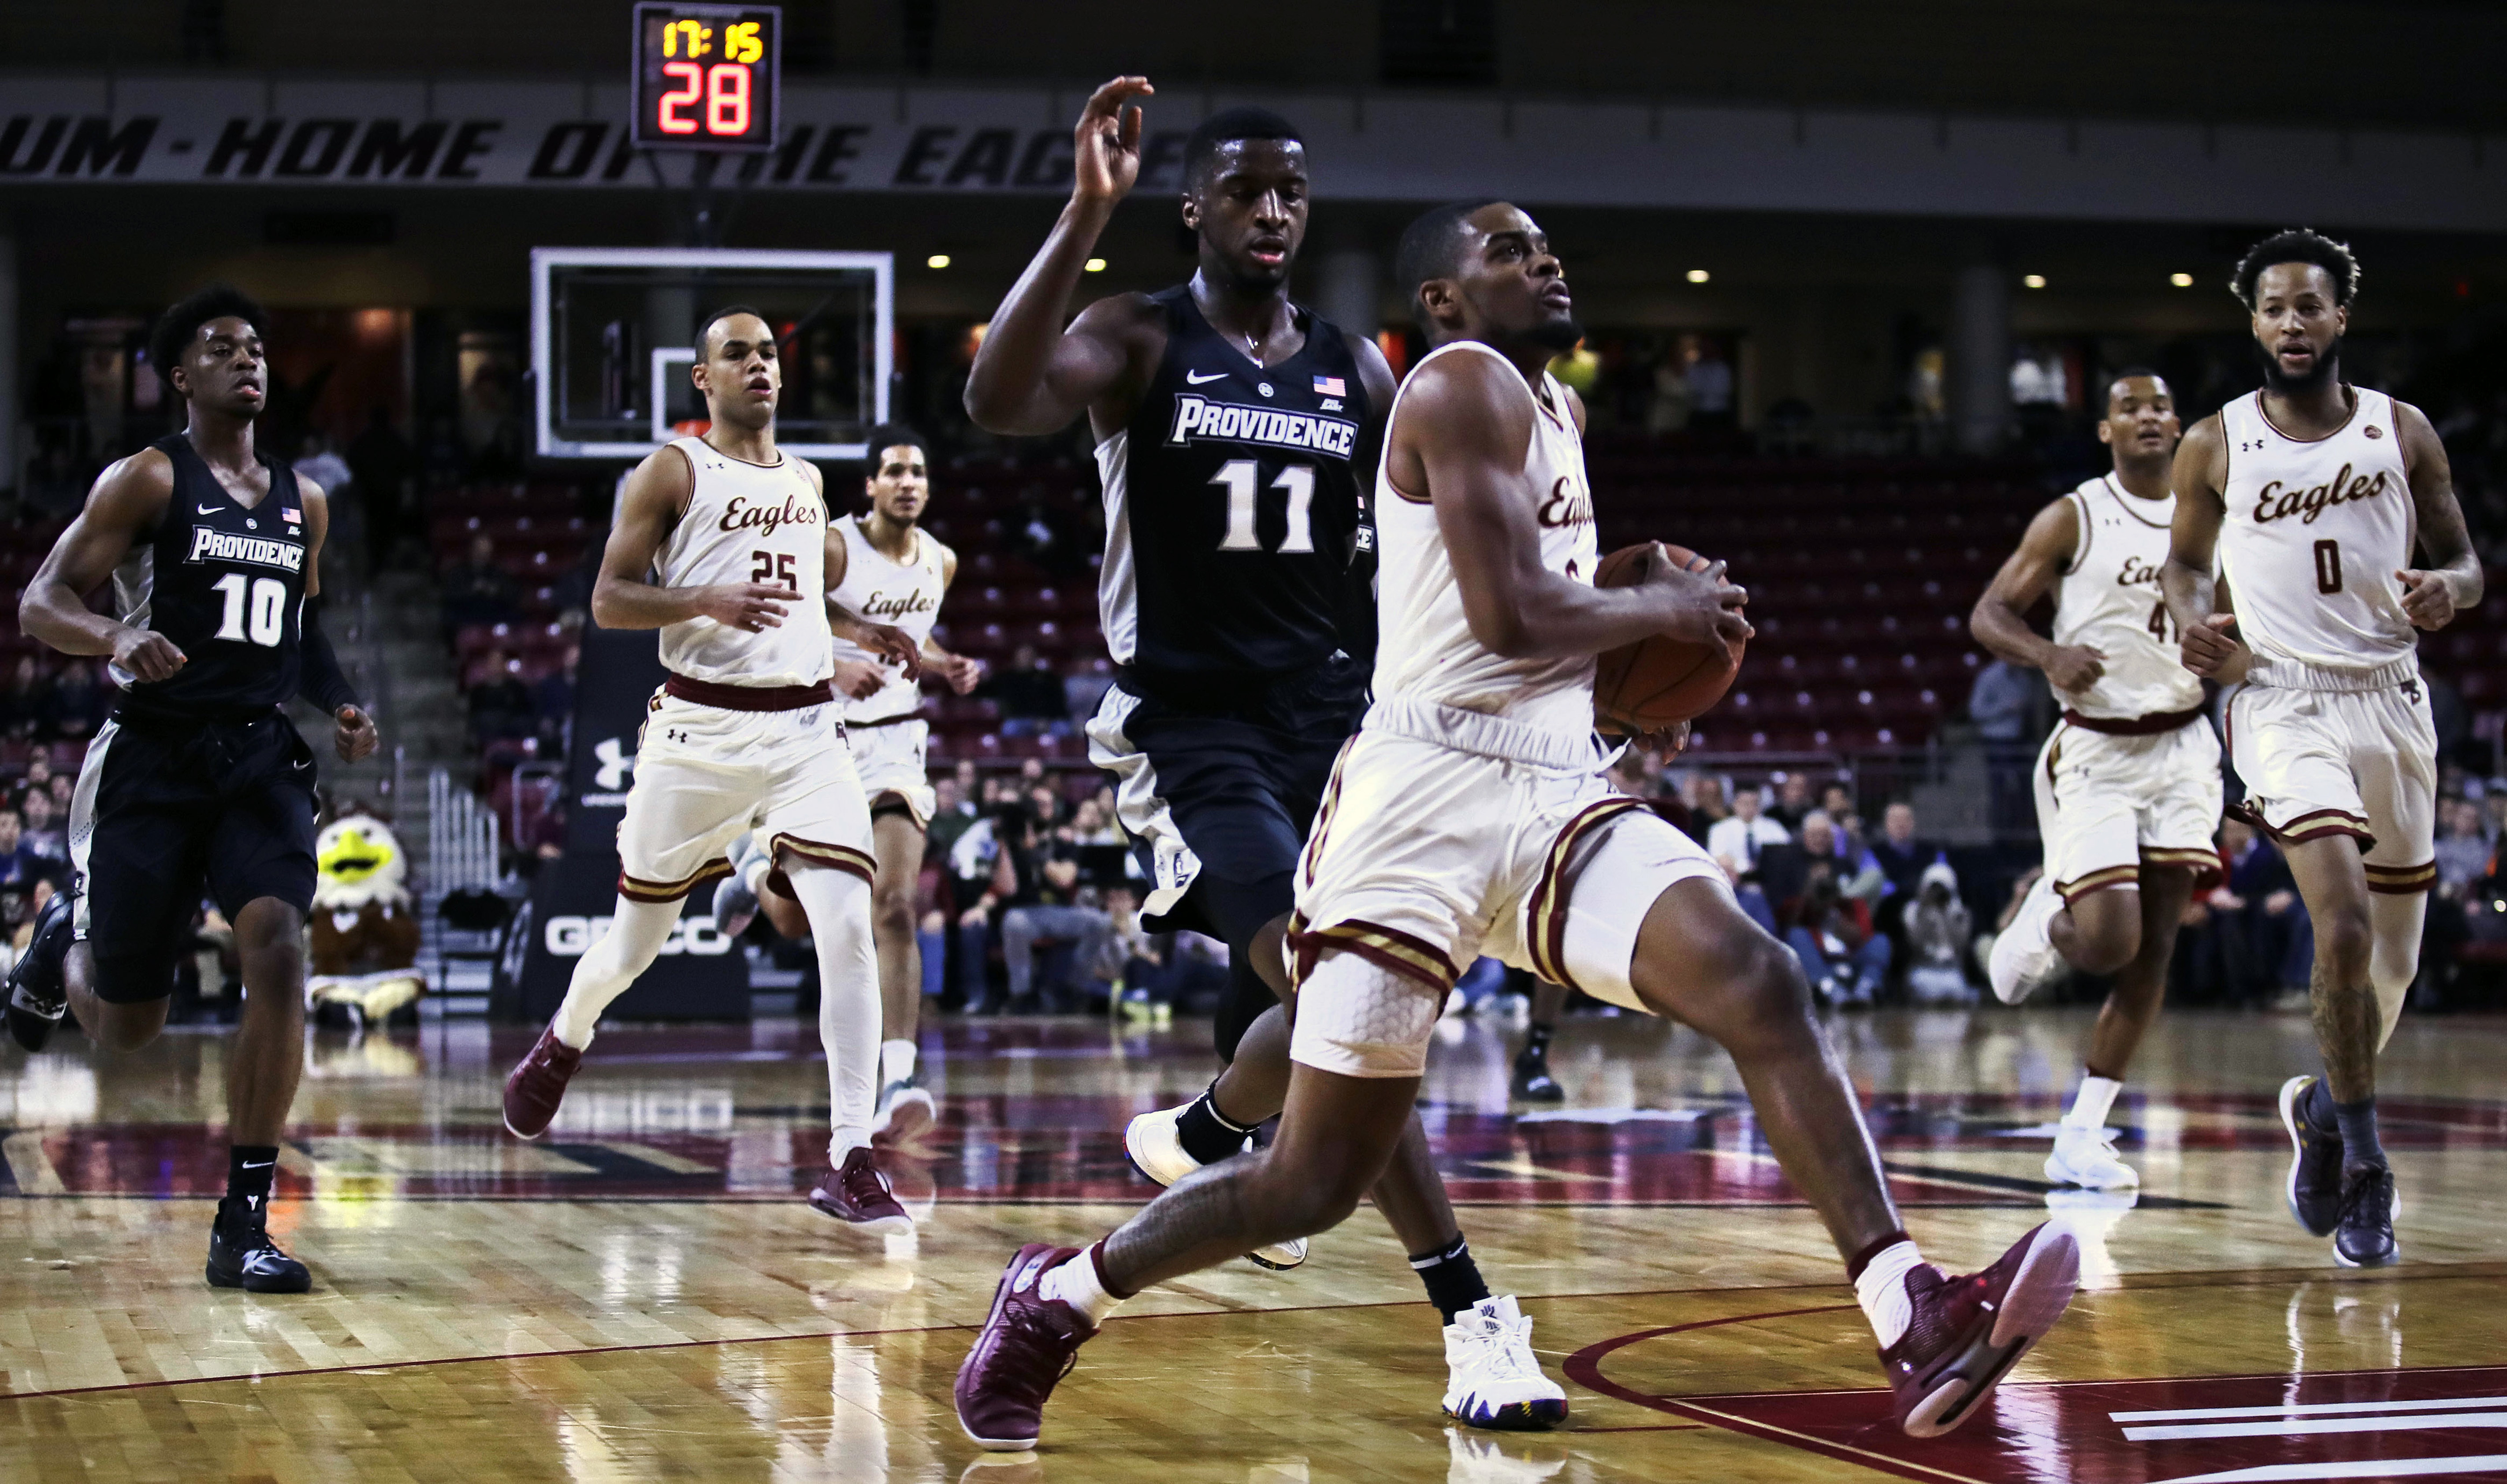 Jackson’s free throws help Providence beat BC in OT